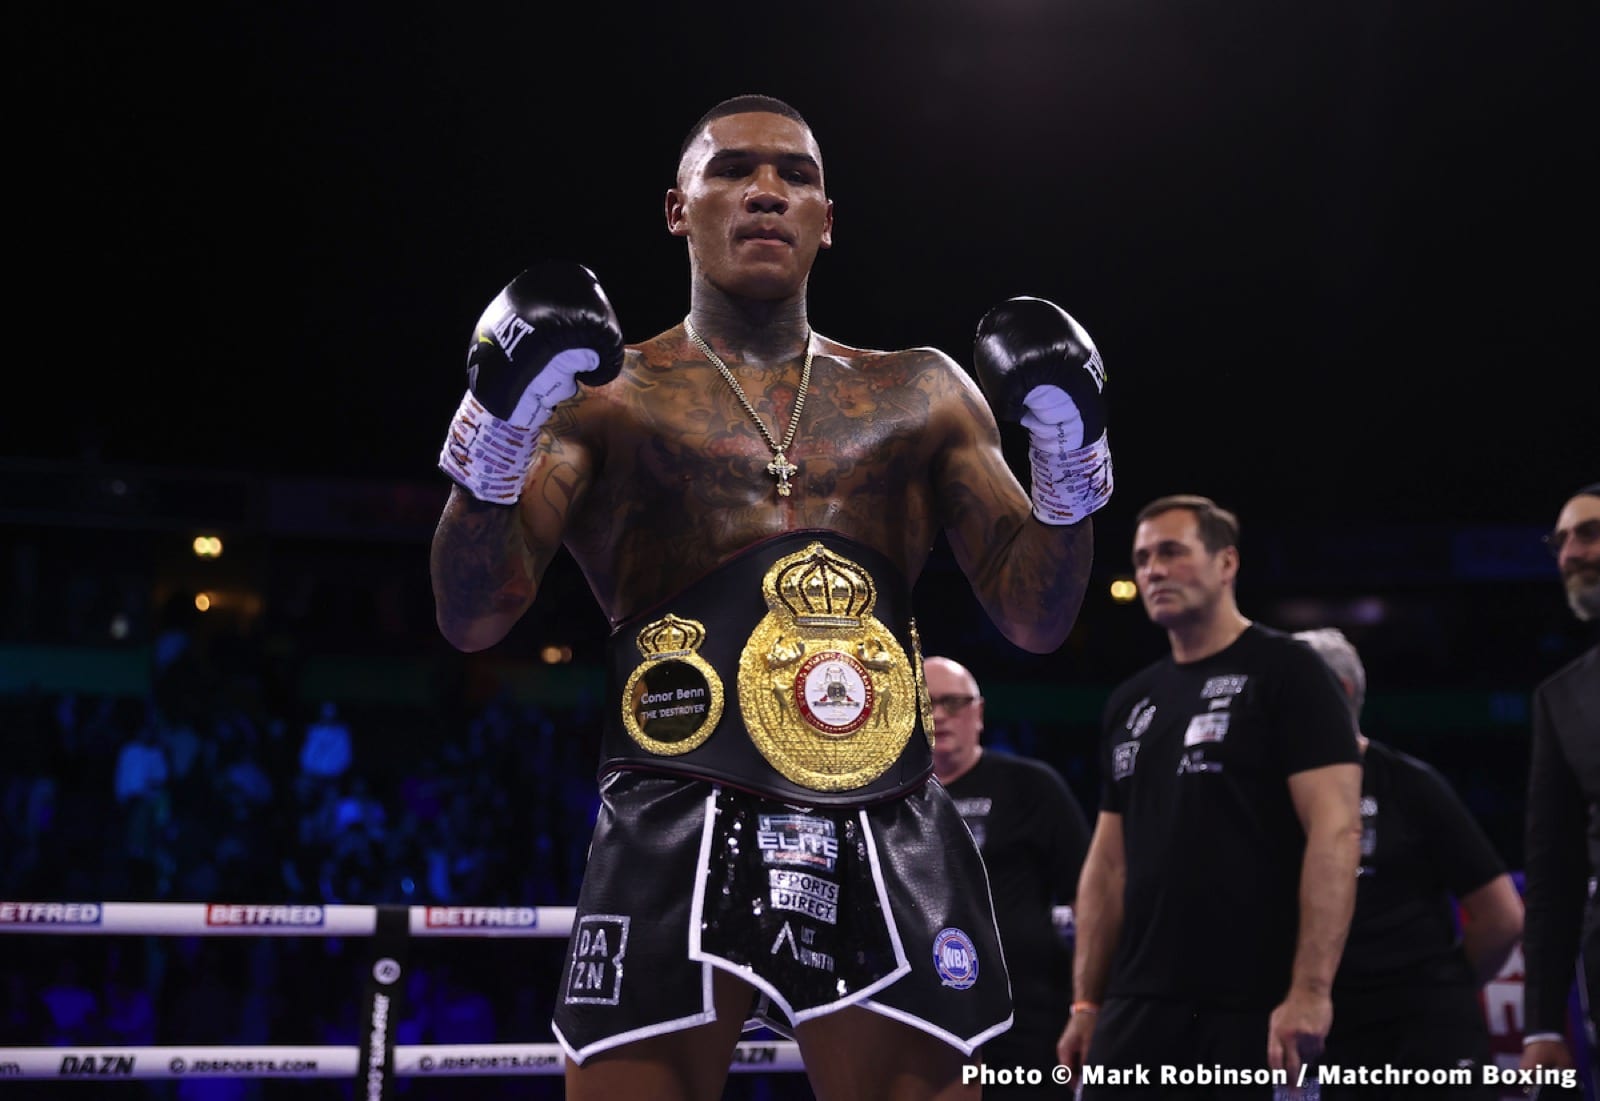 Image: Conor Benn to fight in late September or early October, Keith Thurman a possibility